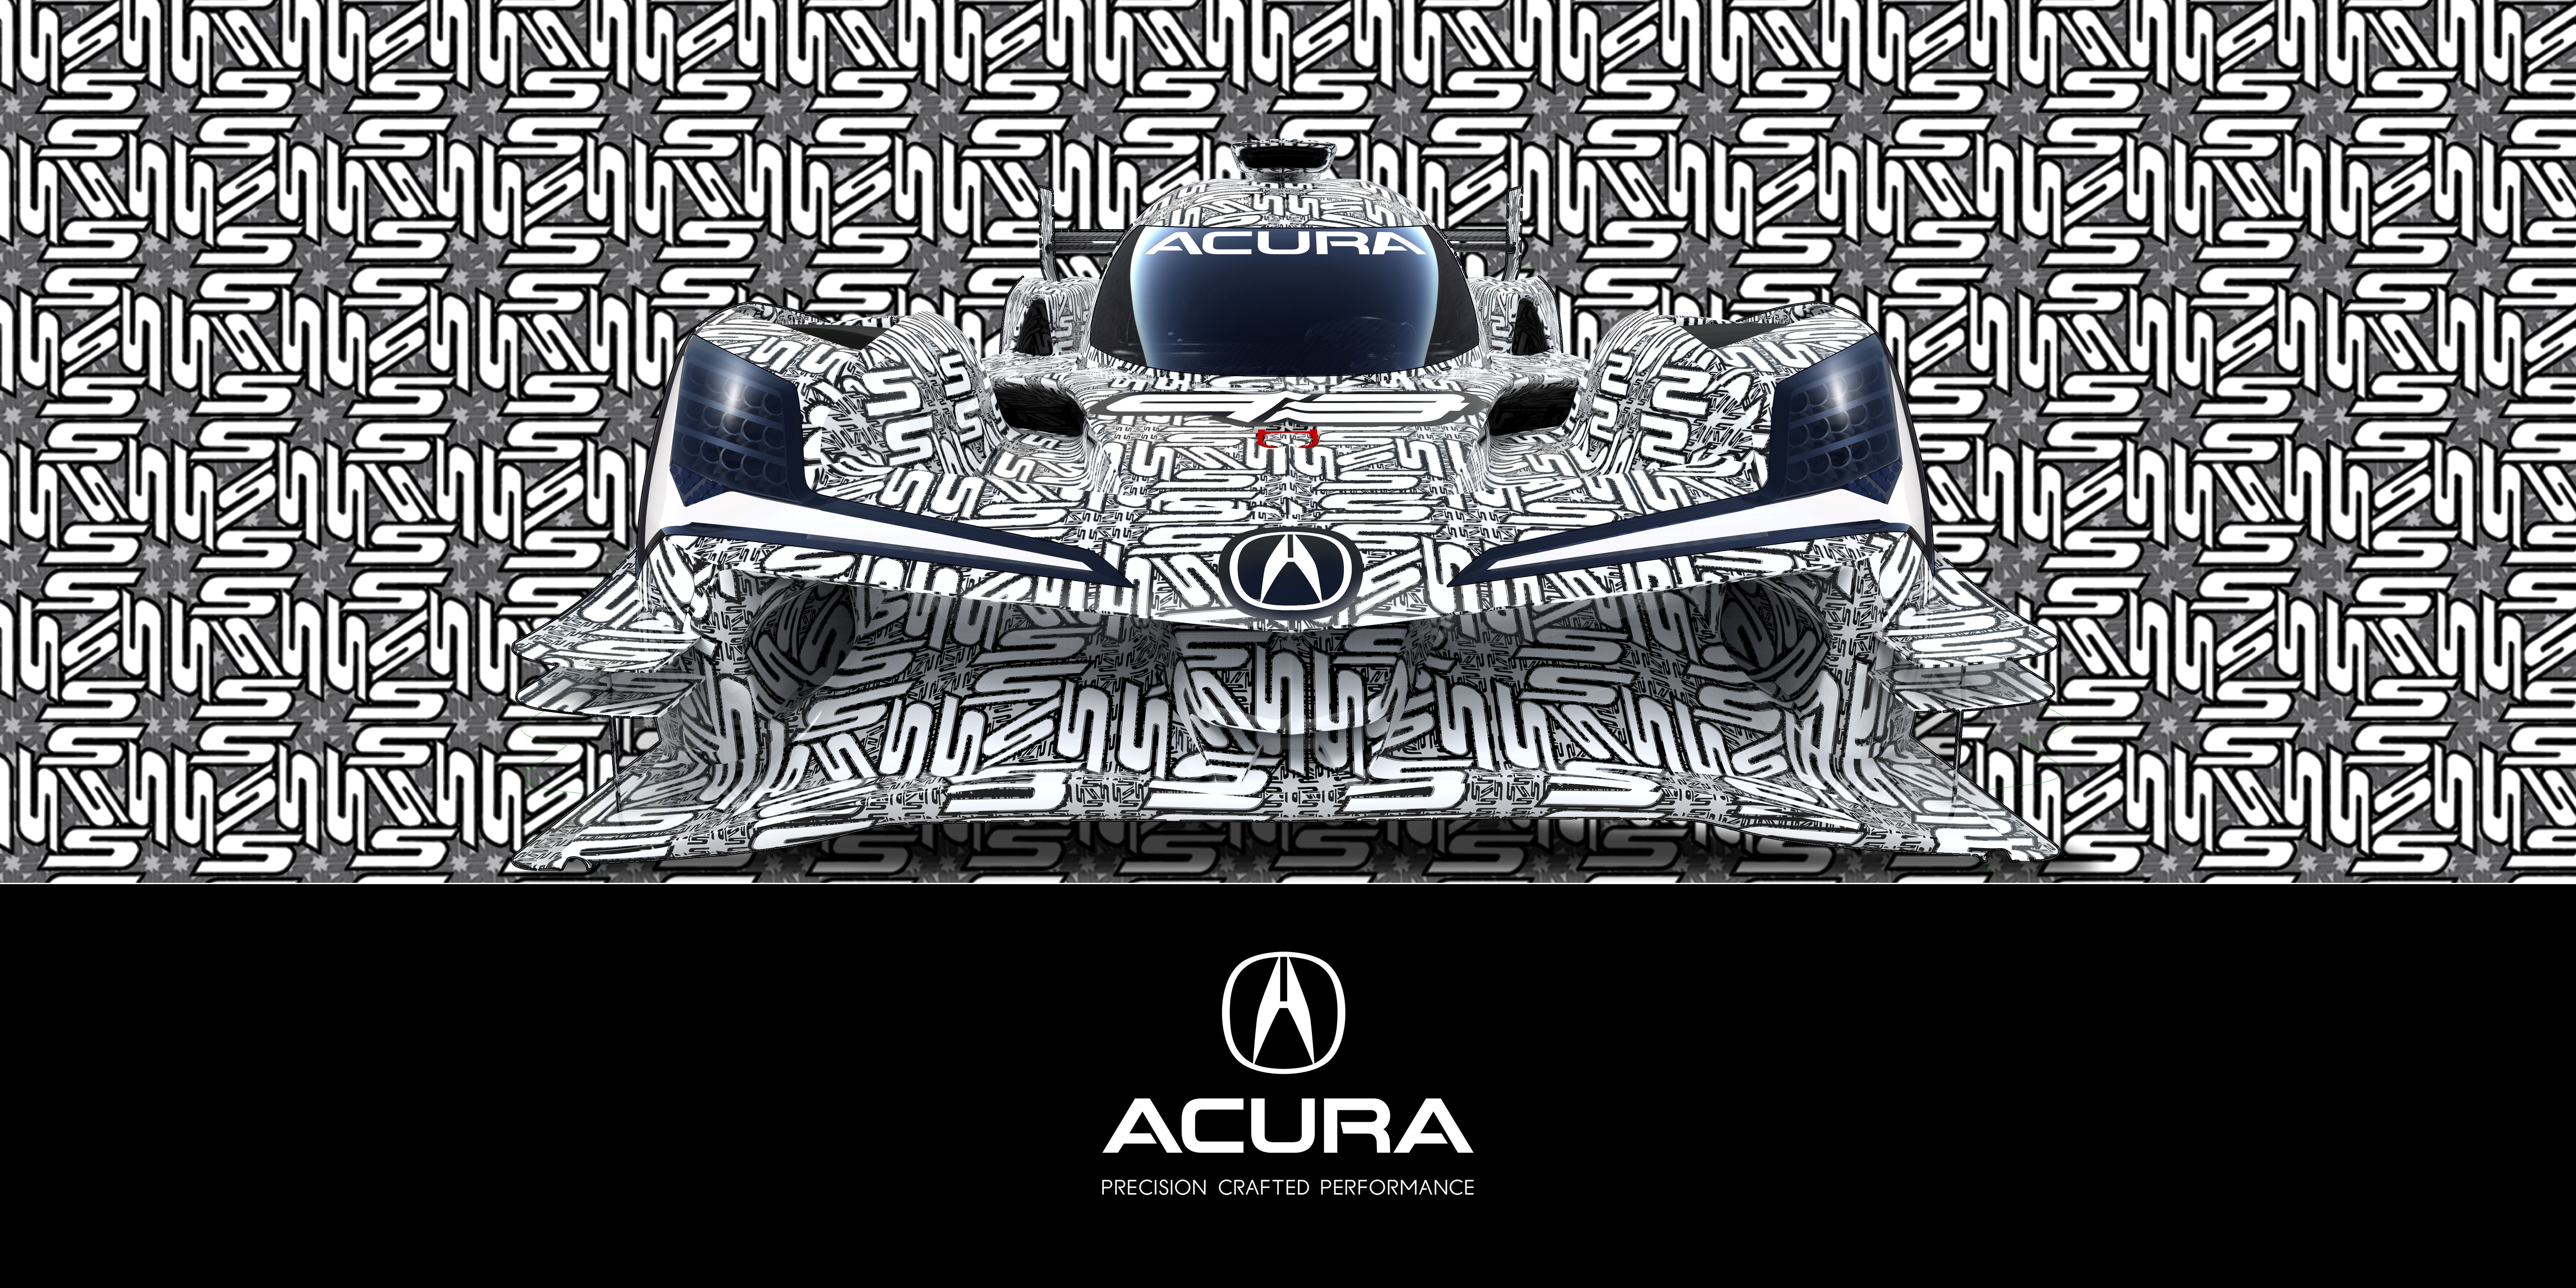 Acura Teases Its New LMDh, But It Won't Go To Le Mans in 2023